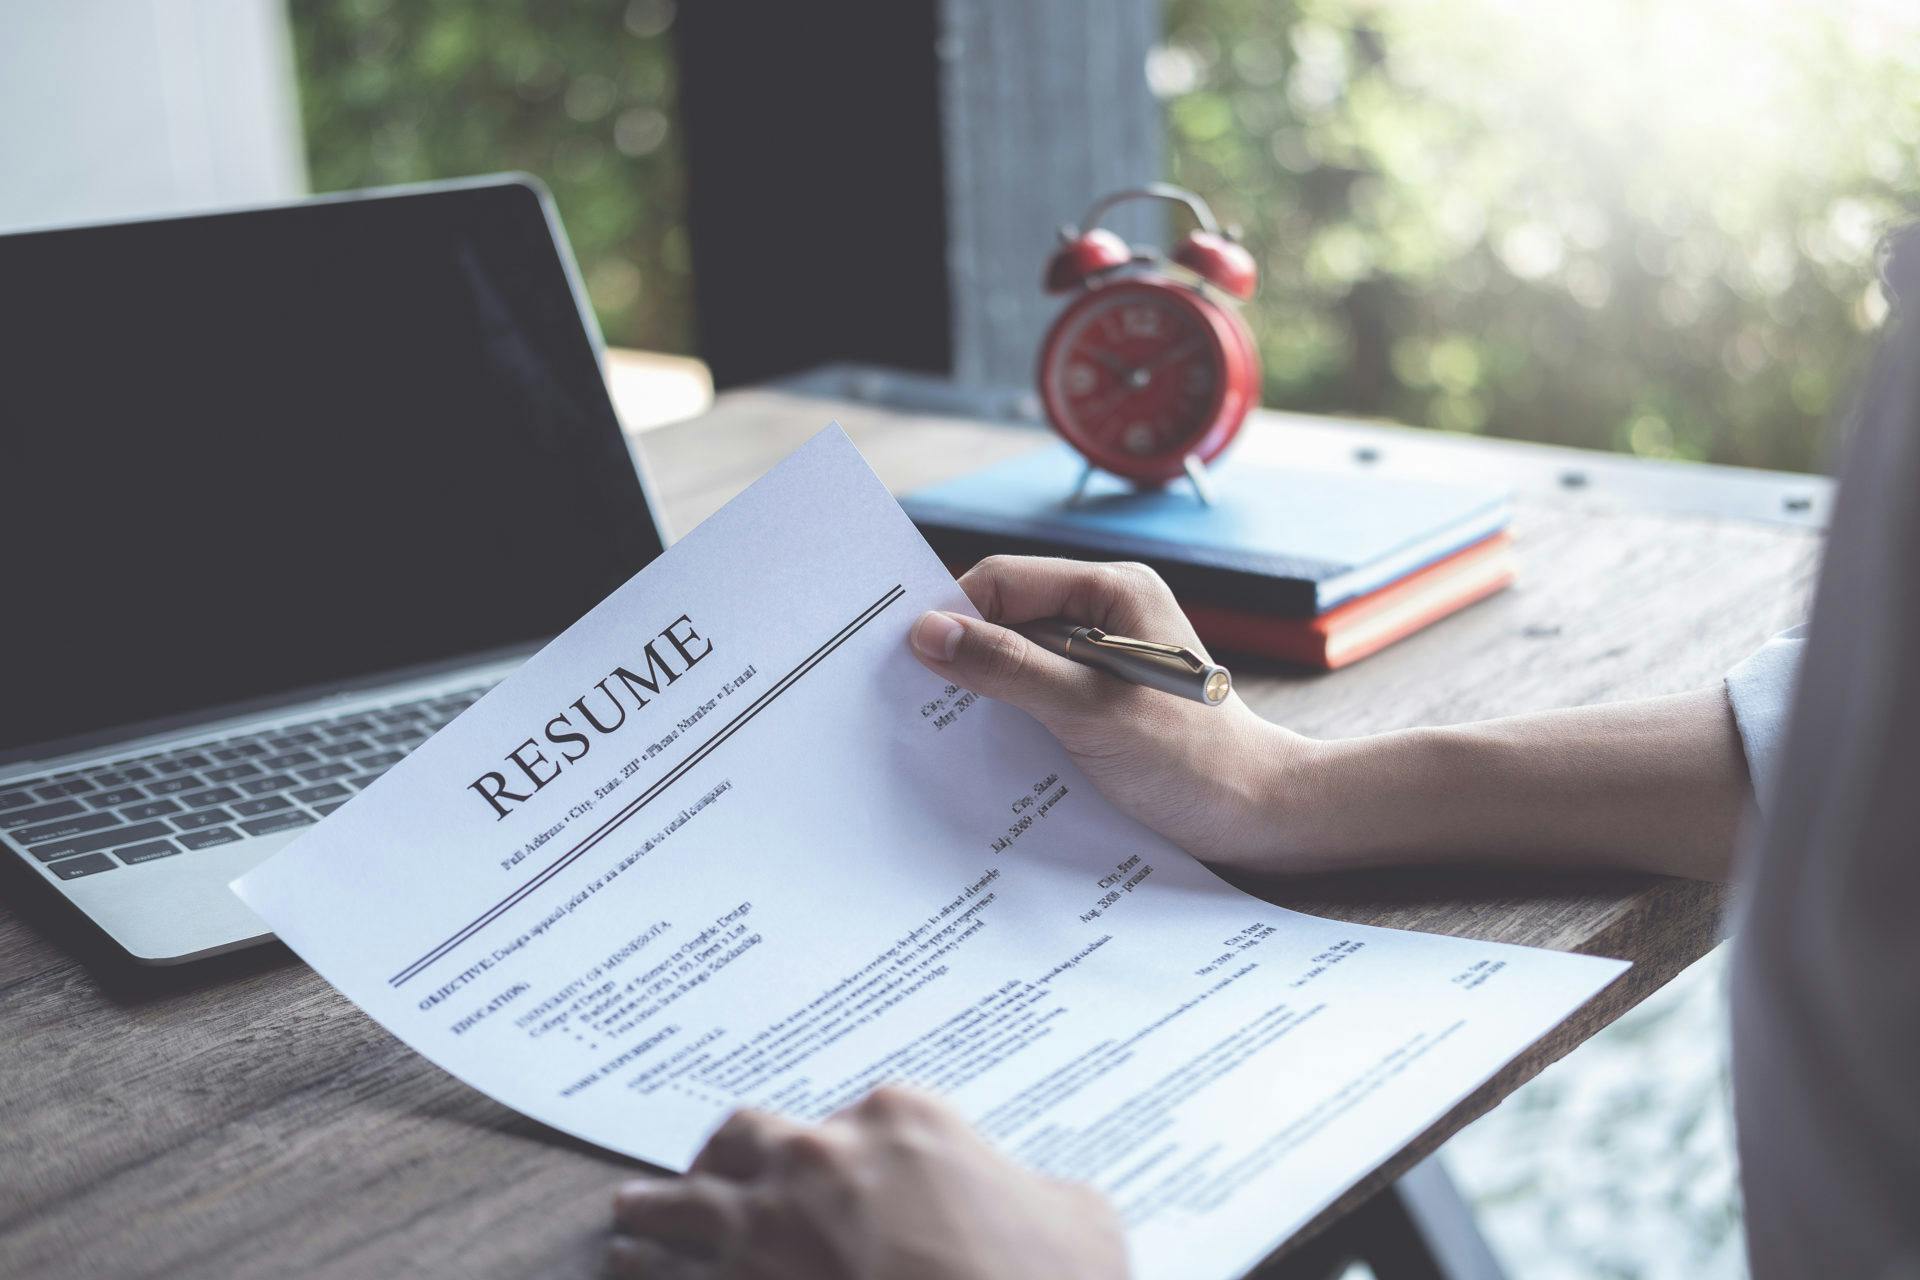 Resume writing - Everything you need to know while applying for a job